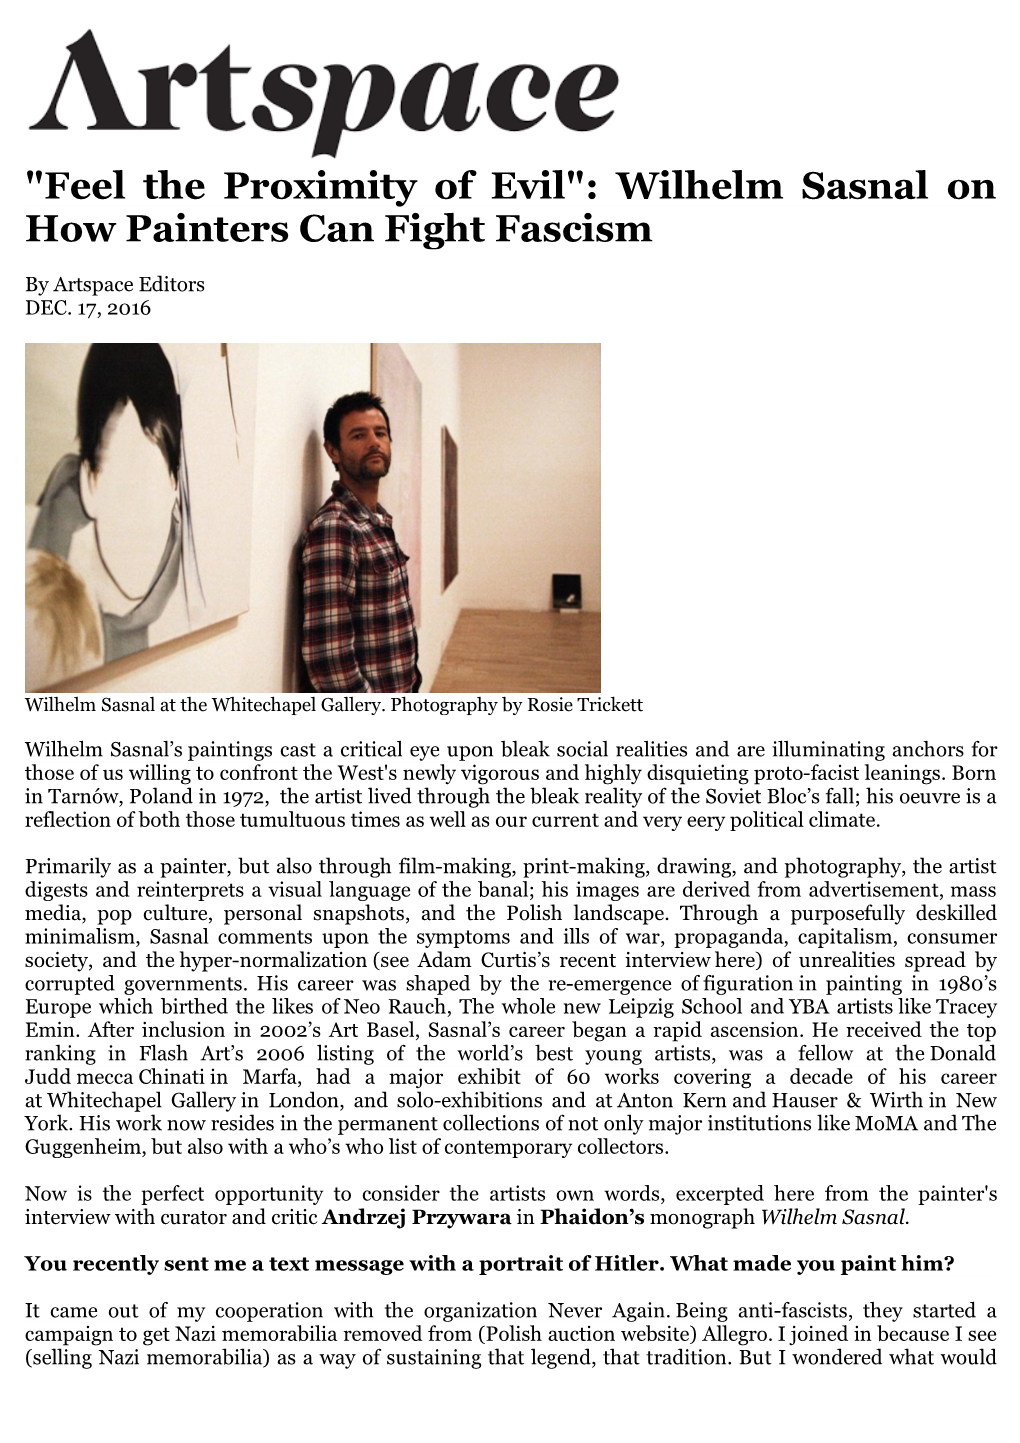 "Feel the Proximity of Evil": Wilhelm Sasnal on How Painters Can Fight Fascism